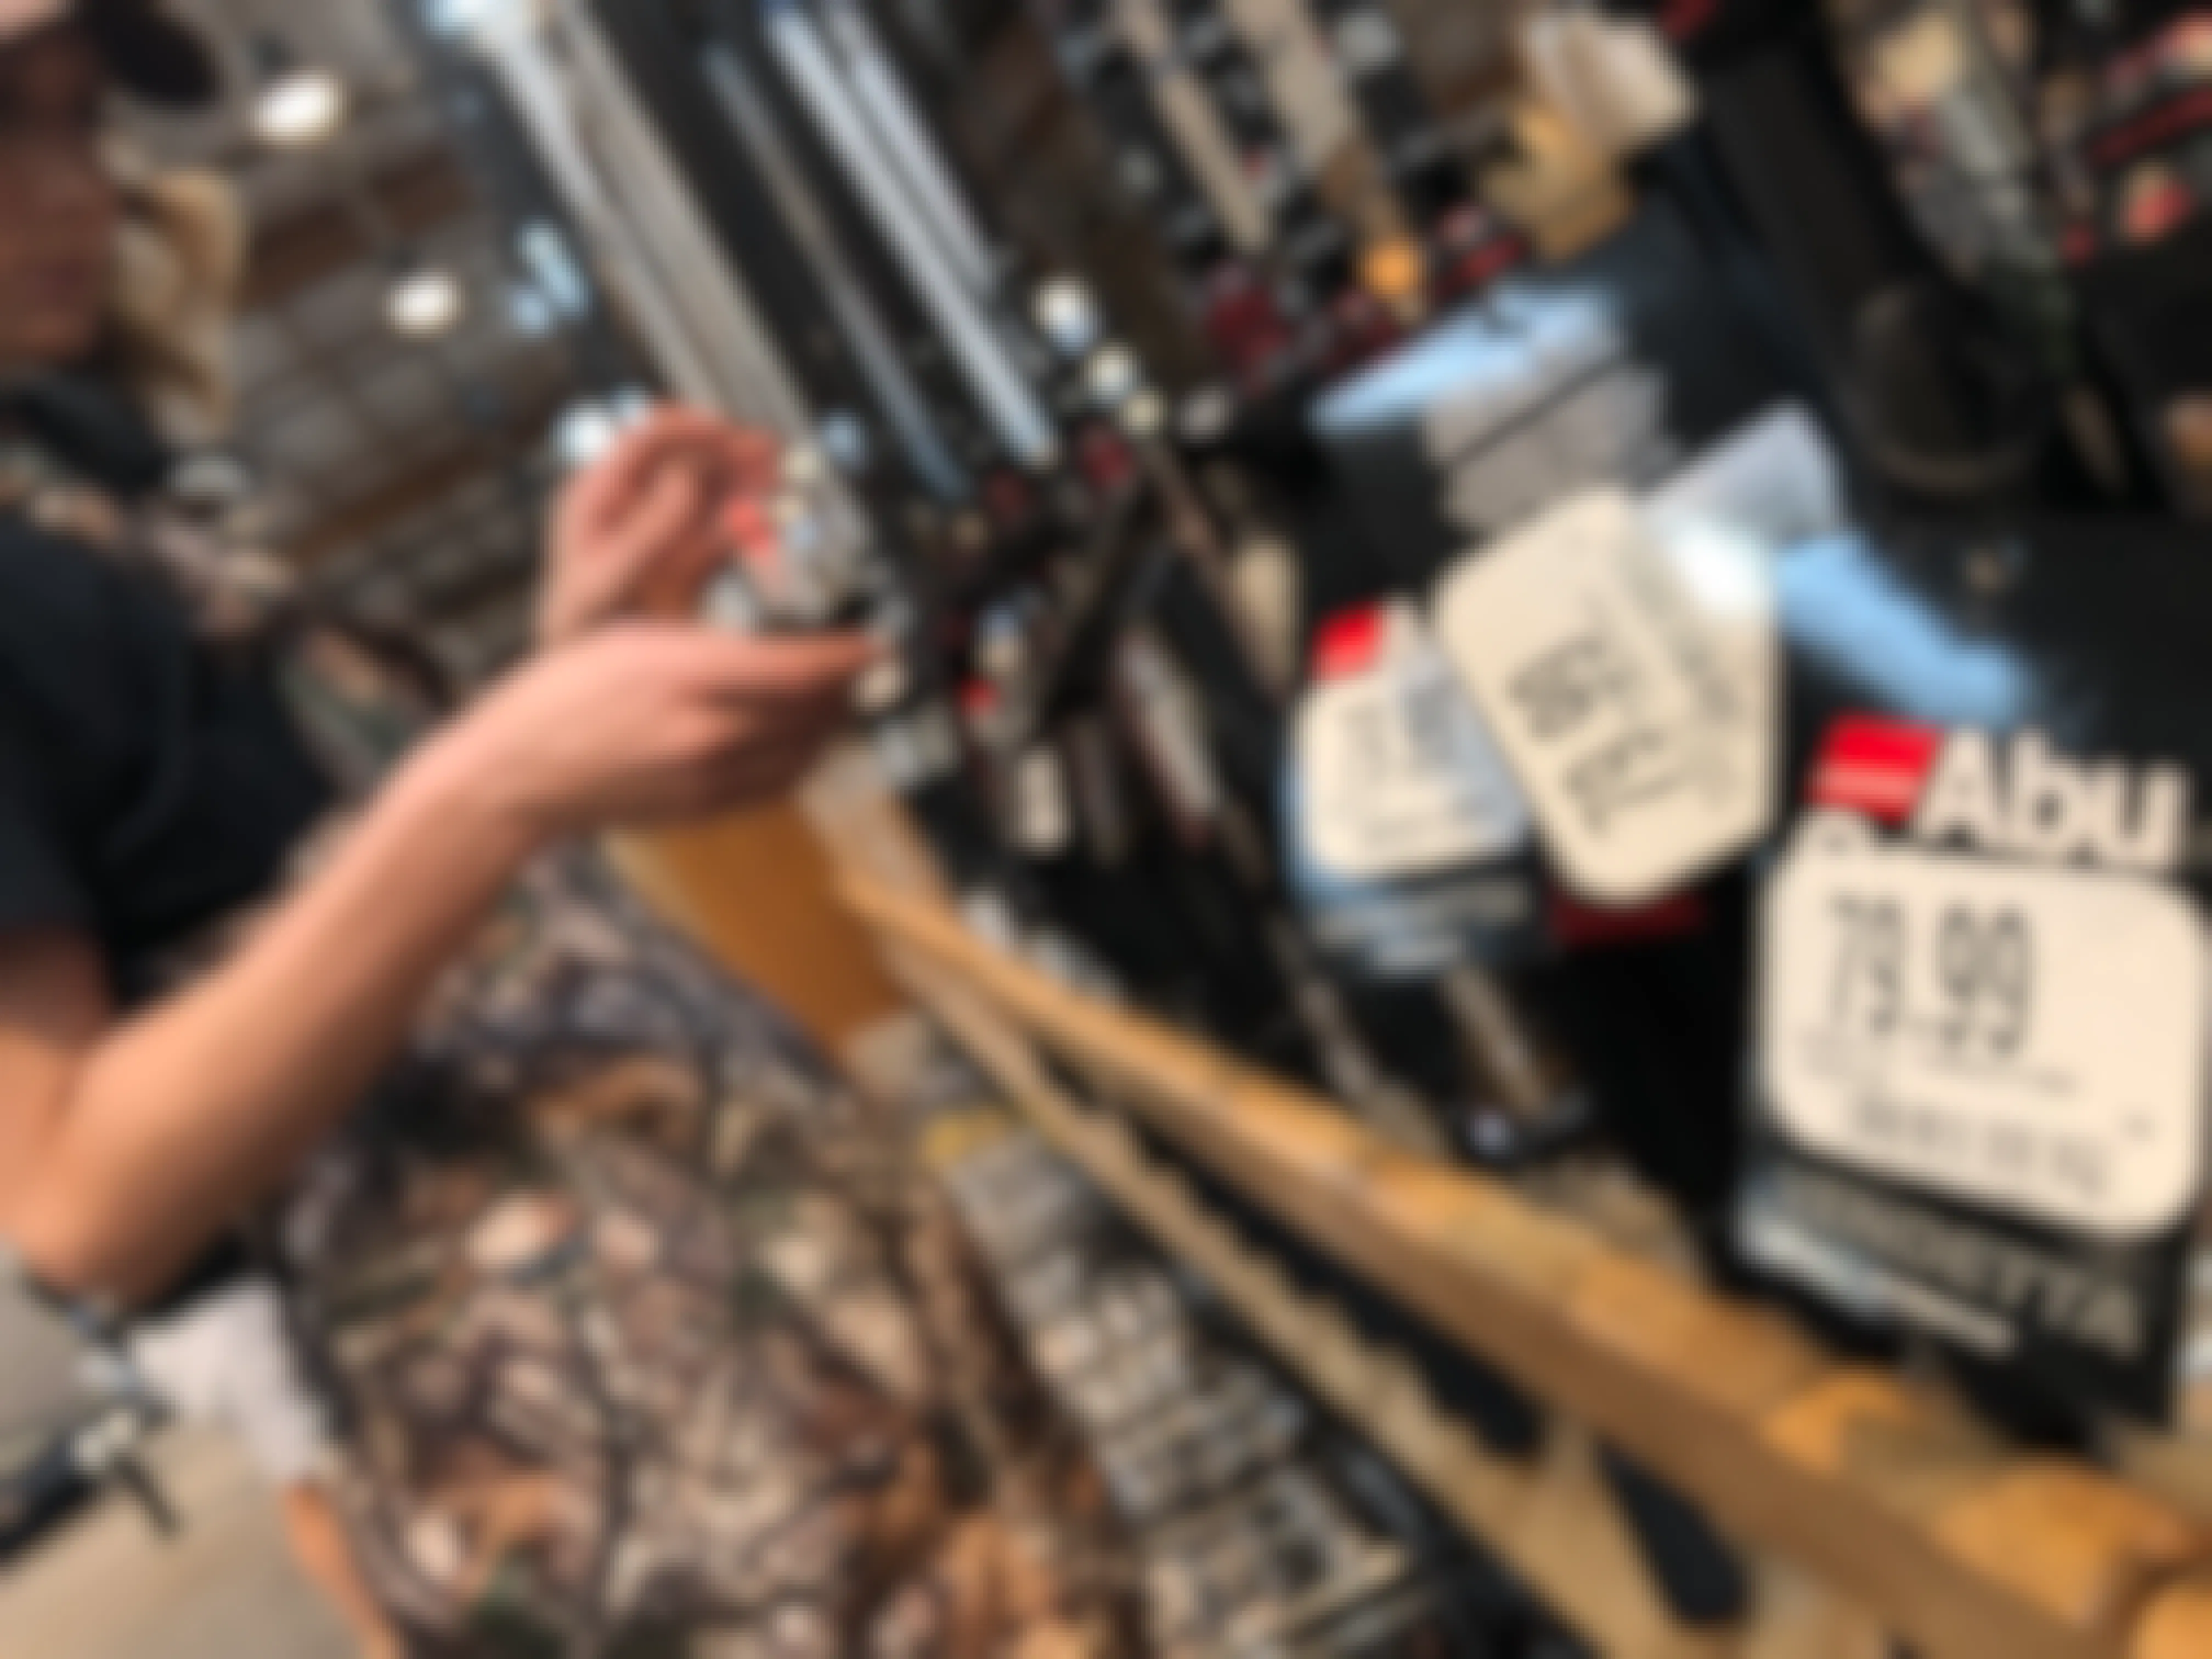 A person looking at fishing rods inside Cabela's, with white price tags in focus.